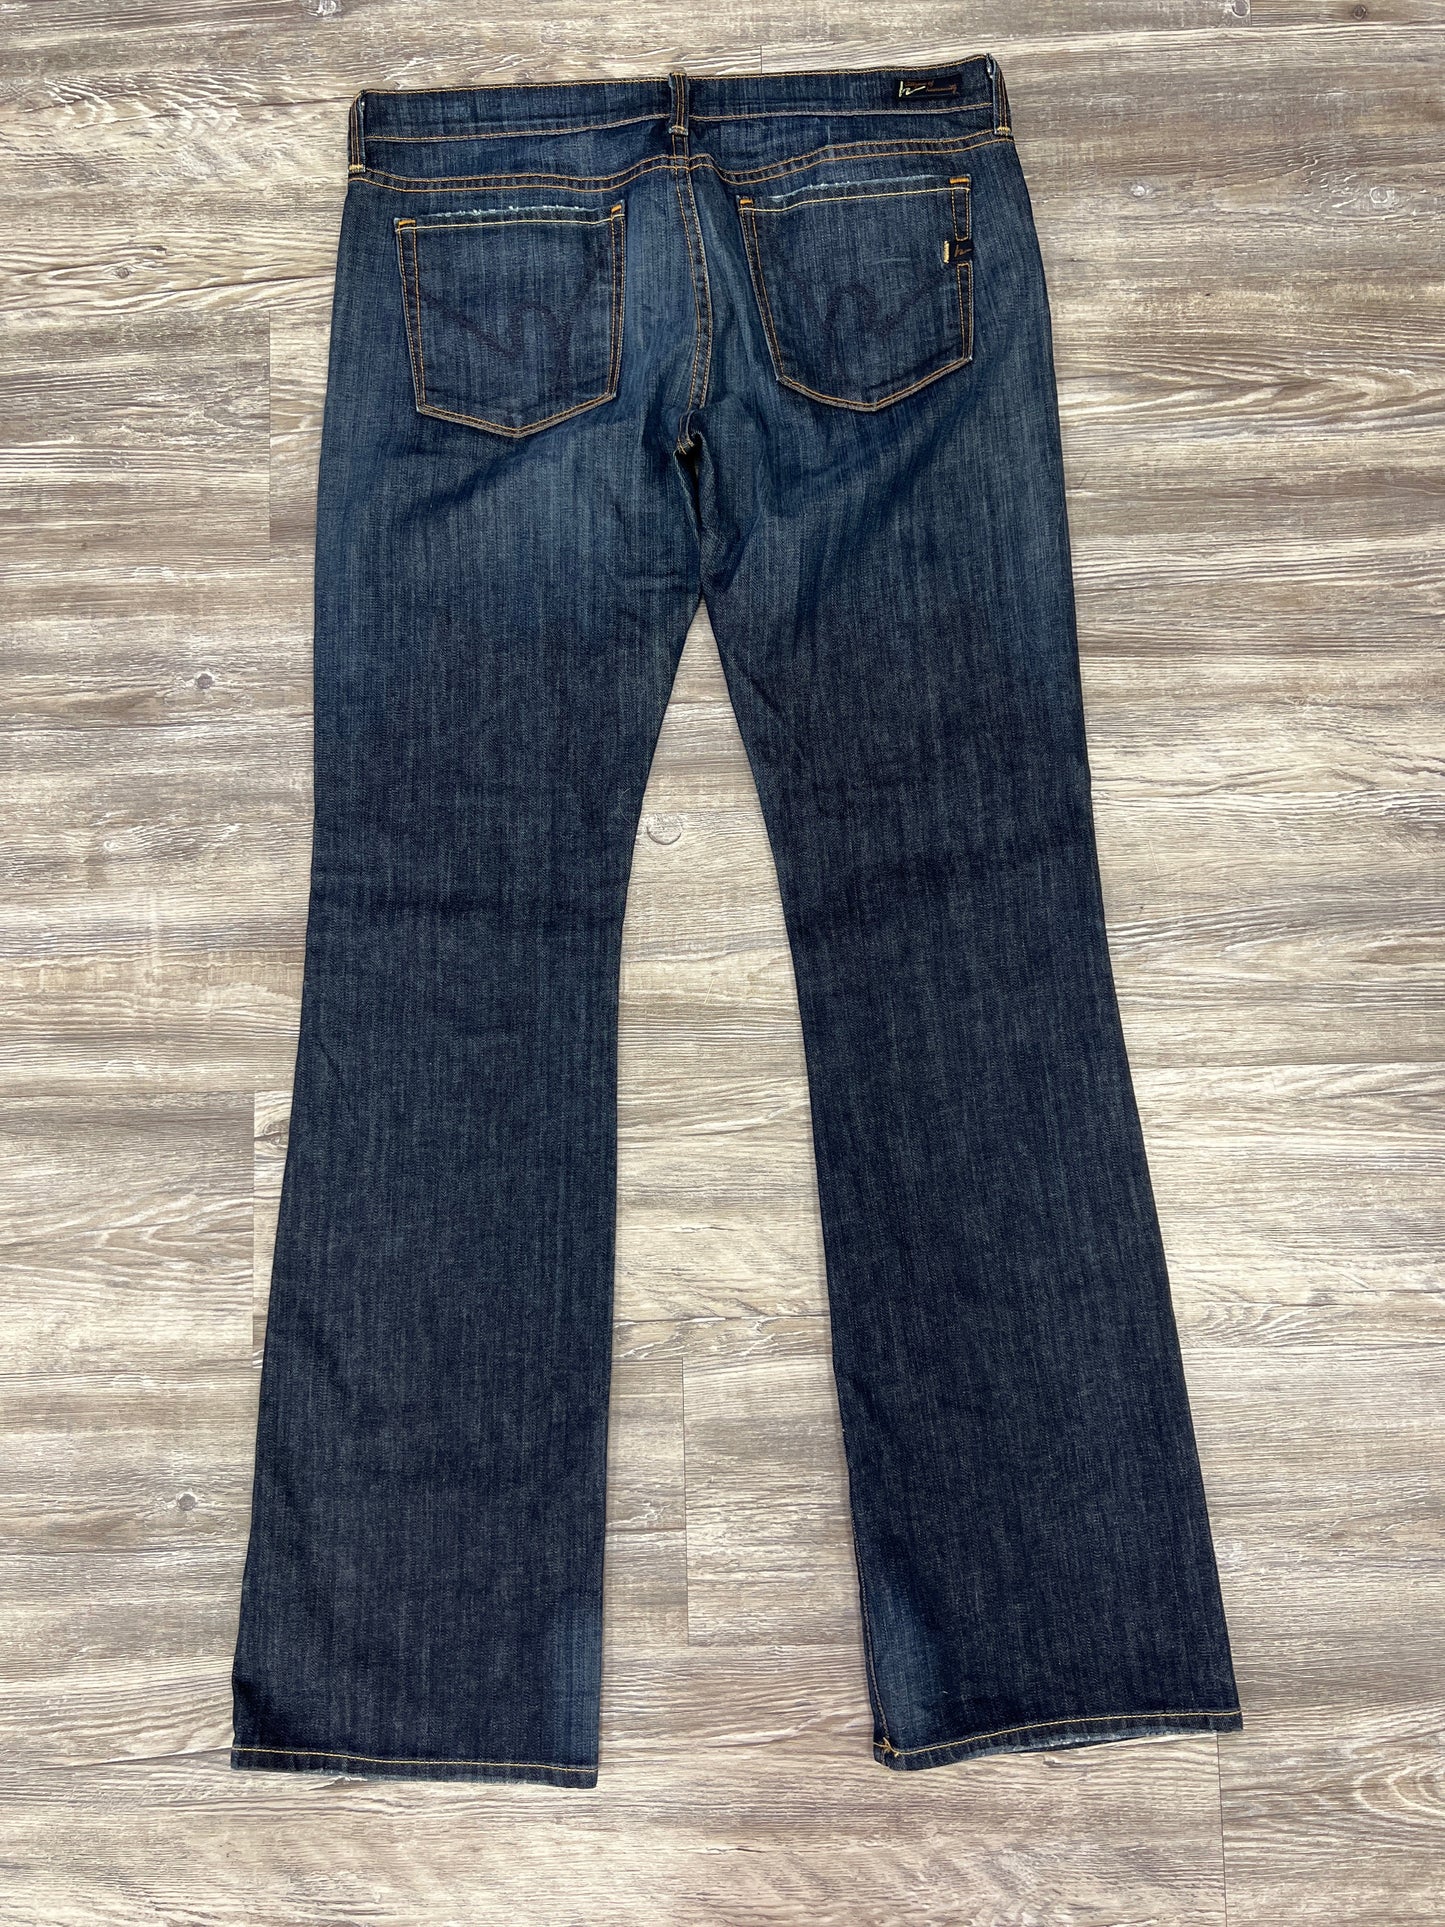 Jeans Designer By Citizens Of Humanity Size: 12